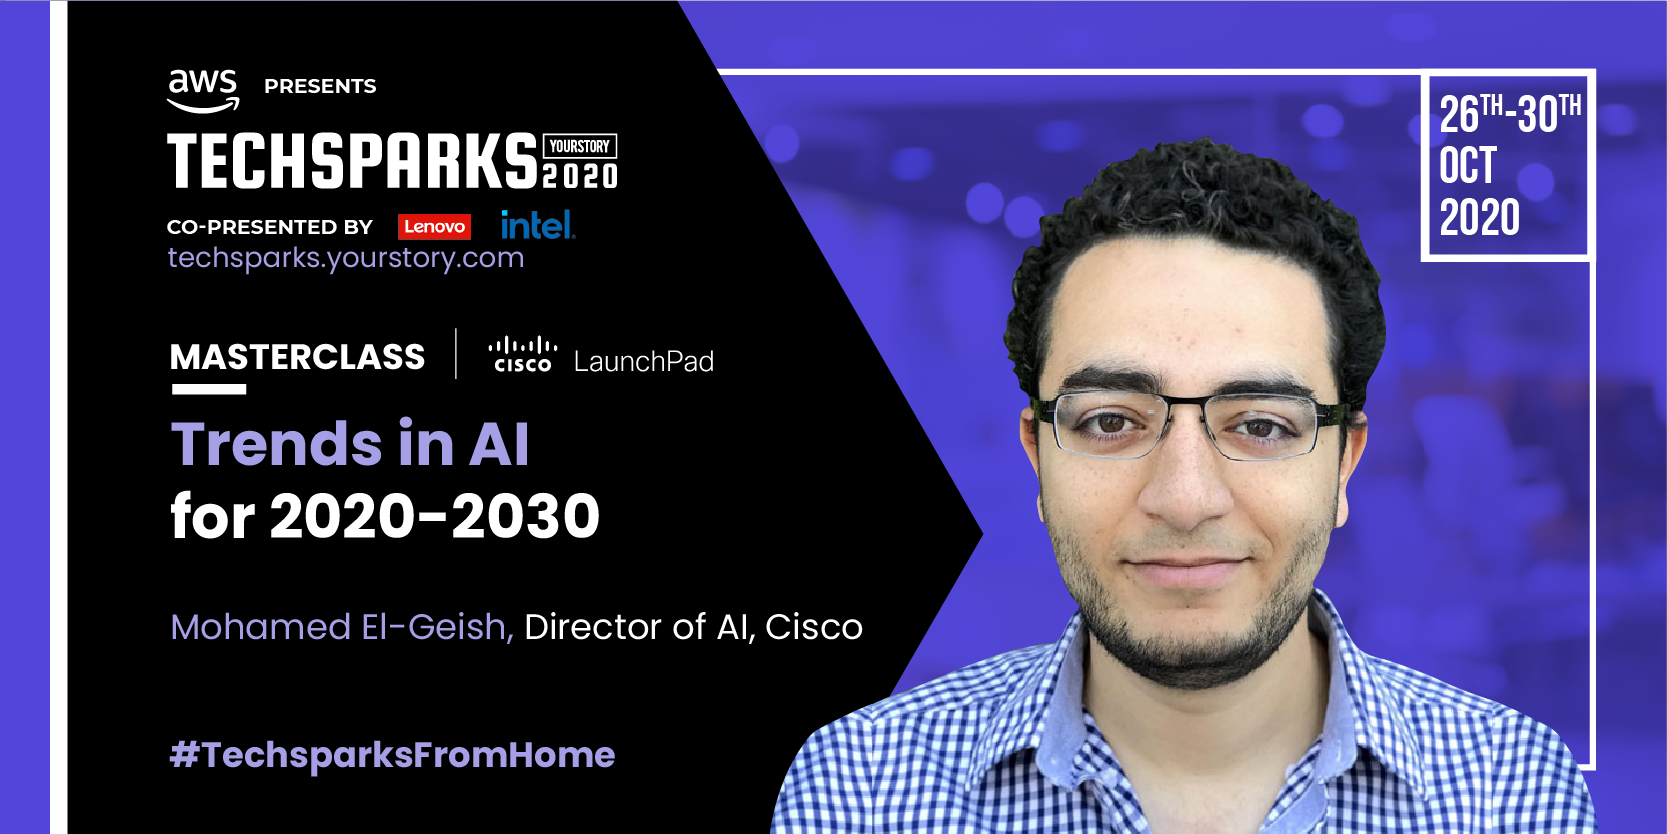 [TechSparks 2020] Mohamed El Geish of Cisco on the top trends and the future of AI
